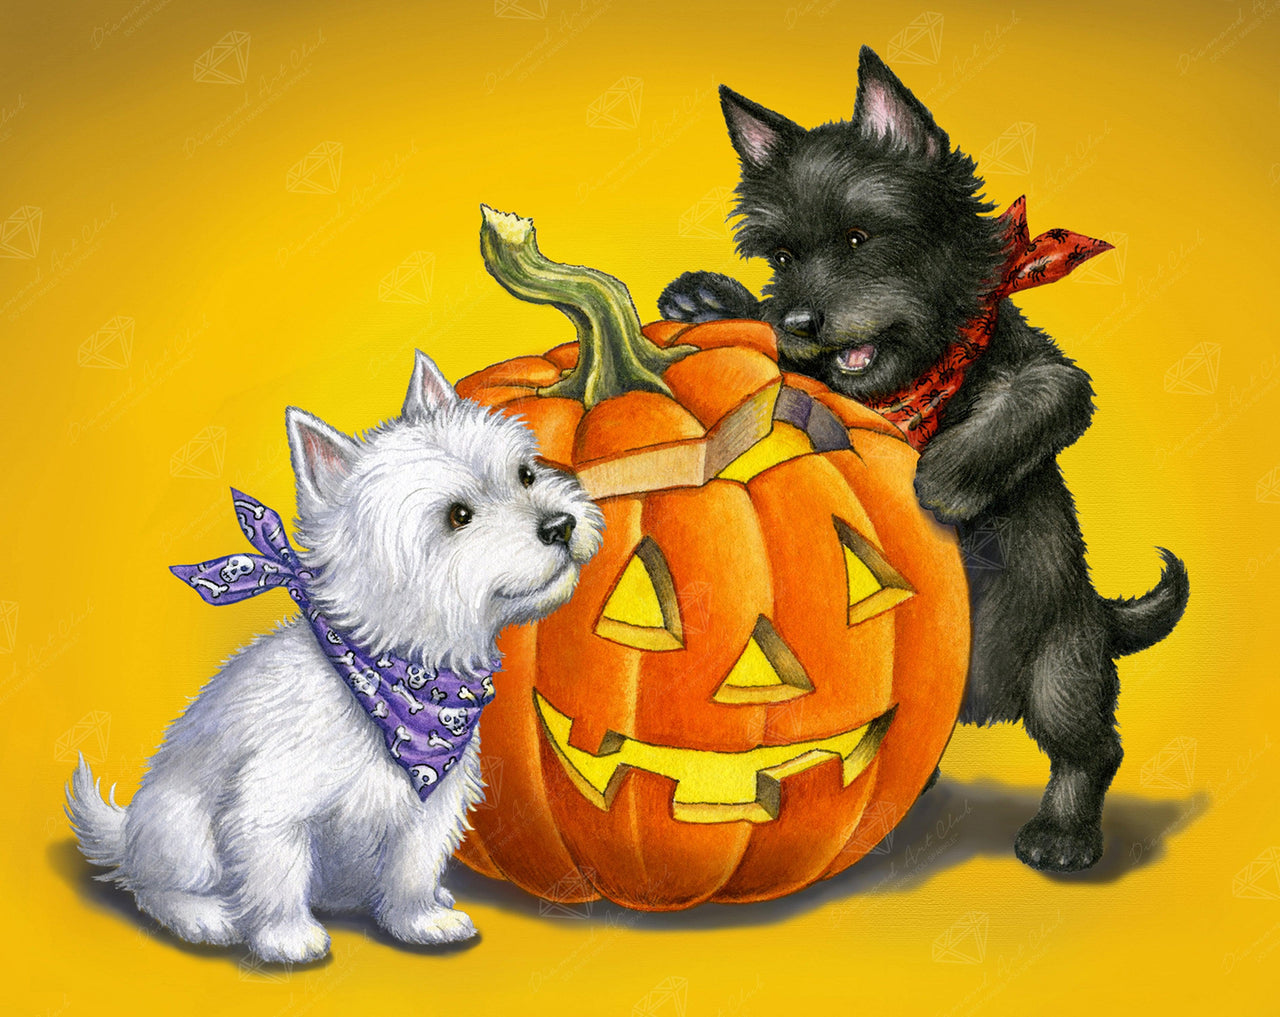 Diamond Painting Westie Scottie Halloween © Rose Mary Berlin 23.8" x 18.9" (61cm x 48cm) / Square with 46 Colors including 3 ABs / 46,899